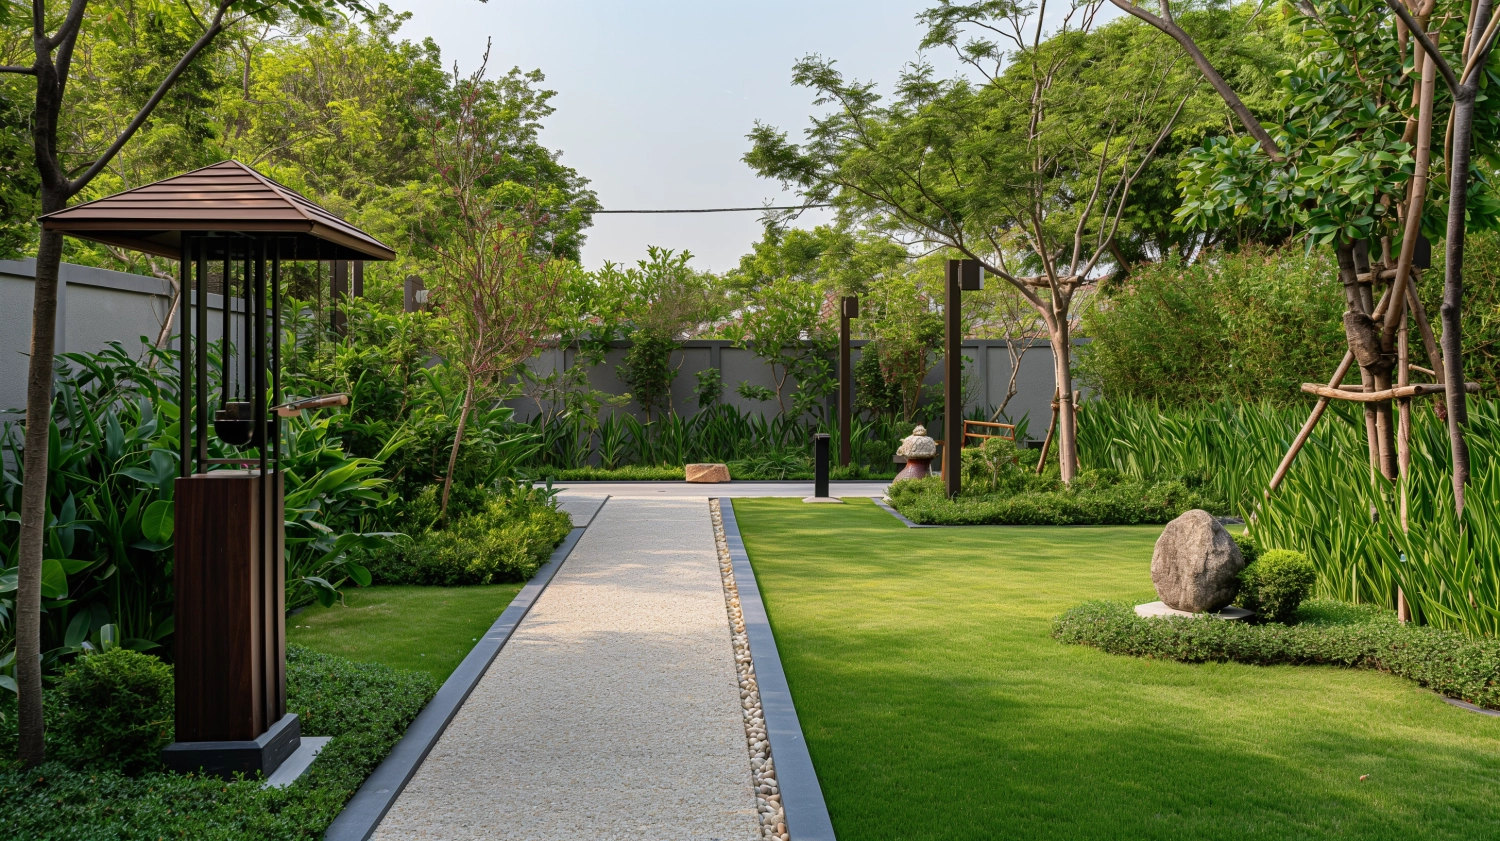 Modern American villa, garden estate, featuring a garden landscape as the focal point. The garden is portrayed with a simple layout, clean and tidy, in the style of California residences. The garden includes a bird feeder, ornaments, a leisure area, dry cement flooring, wind chimes. The photo was captured with a Canon 5D Mark II camera, presenting a frontal view at a medium-close shot, showcasing the authentic scene.